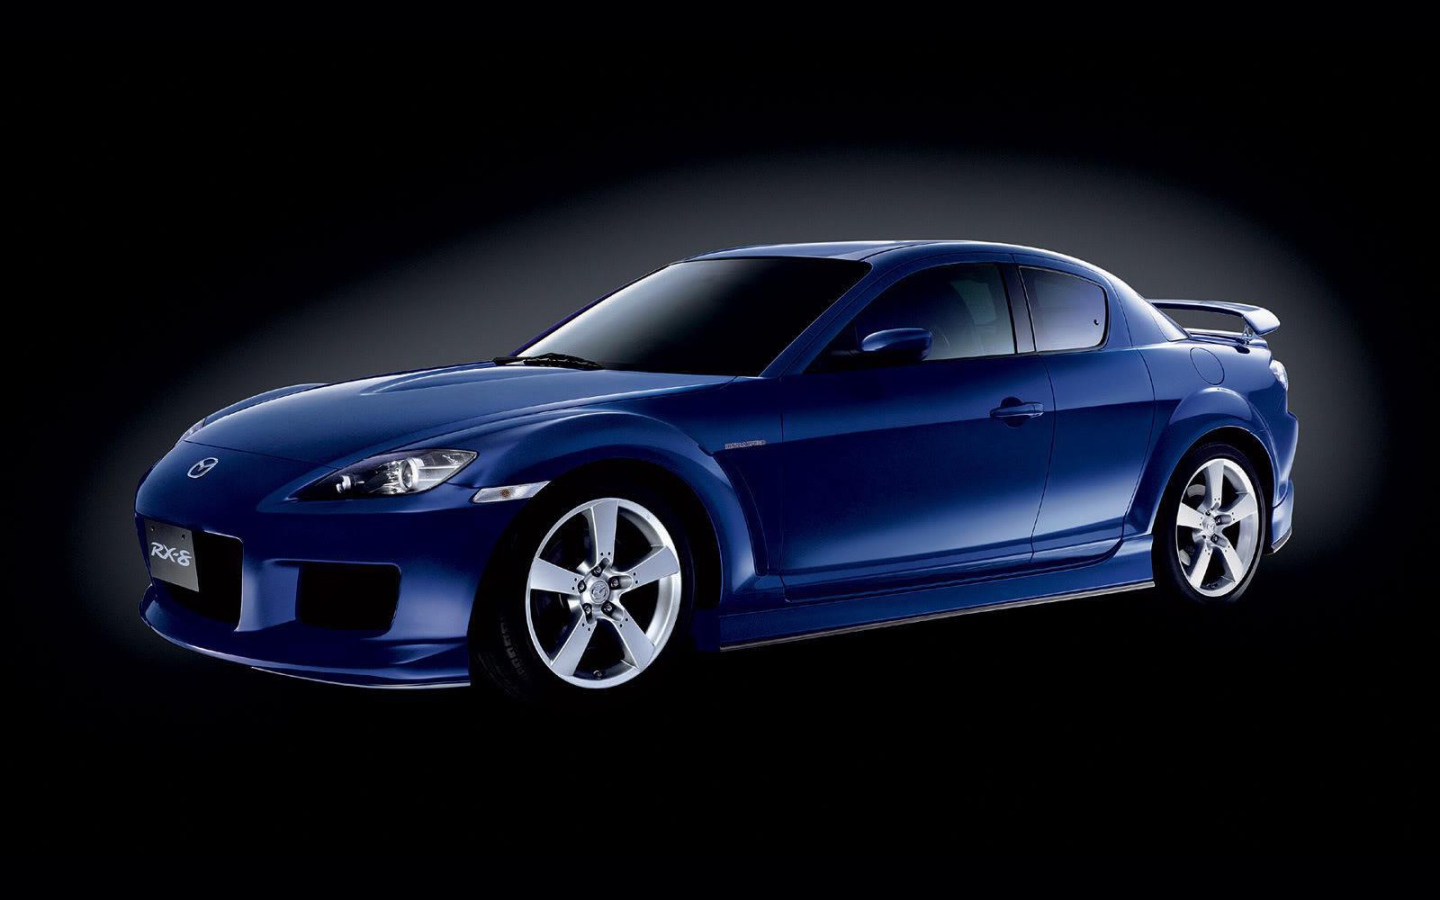 Mazda RX 8 car on the road 